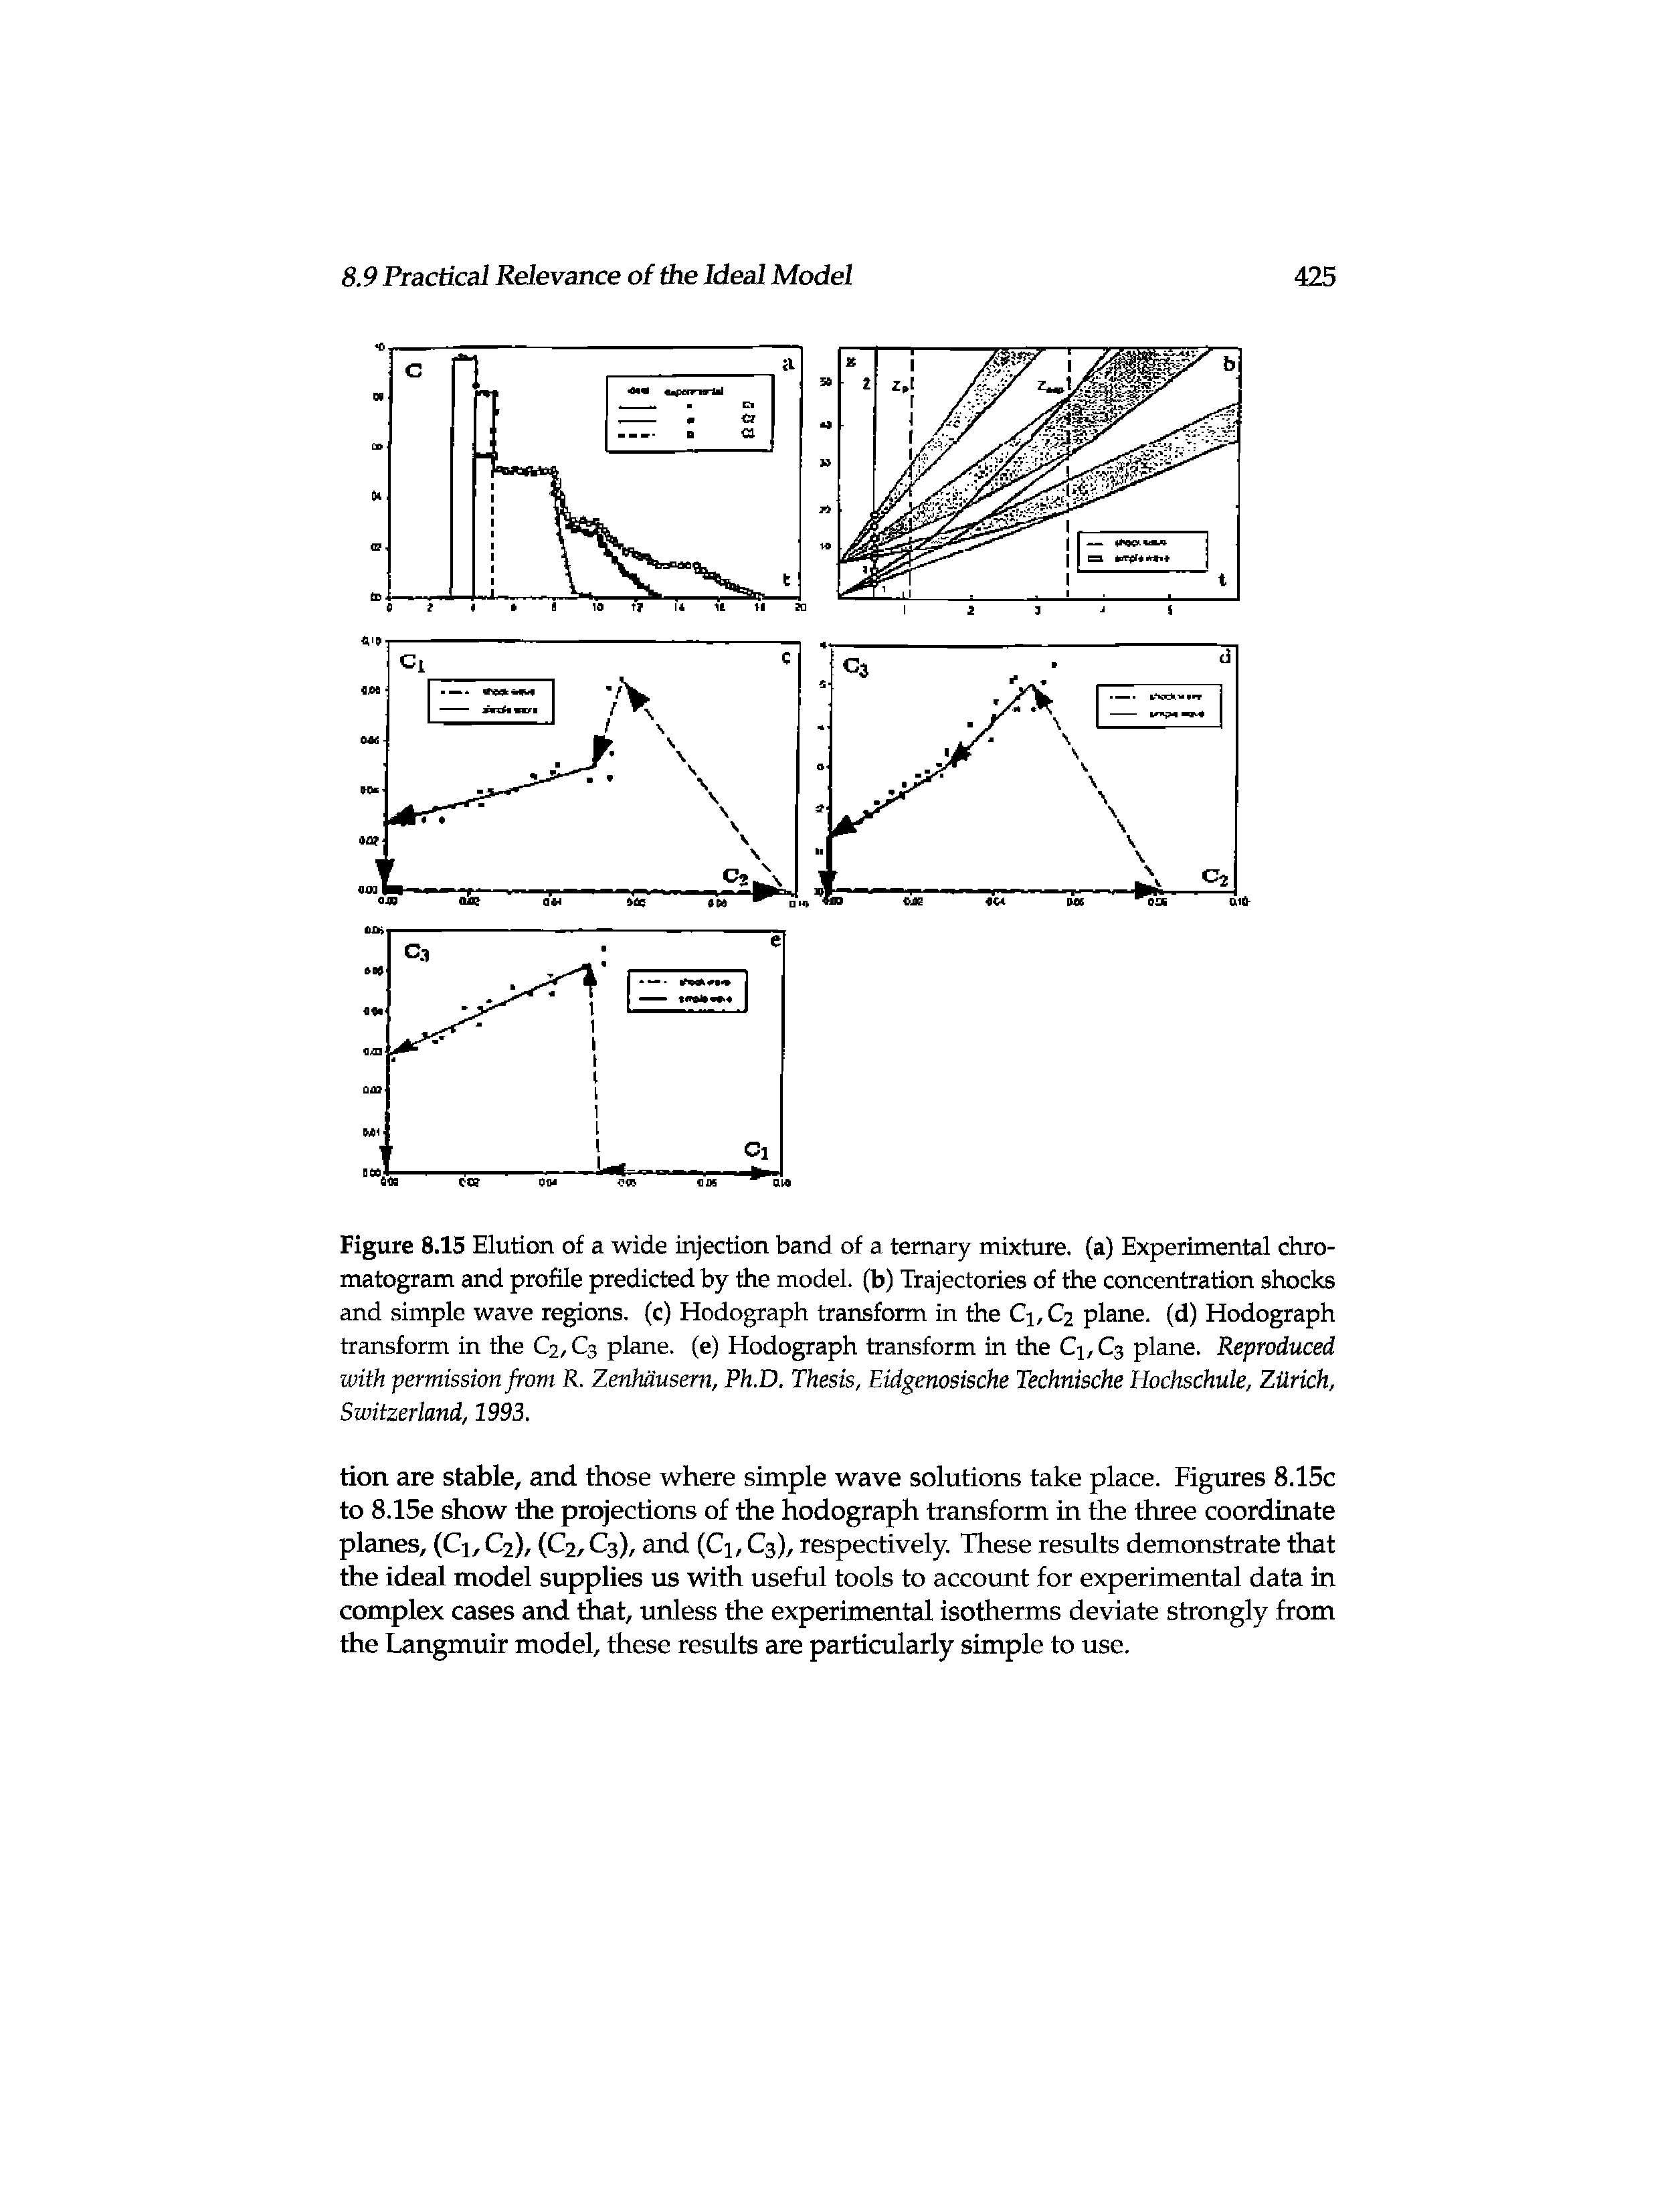 Figure 8.15 Elution of a wide injection band of a ternary mixture, (a) Experimental chromatogram and profile predicted by the model, (b) Trajectories of the concentration shocks and simple wave regions, (c) Hodograph transform in the Cj,C2 plane, (d) Hodograph transform in the C2, C3 plane, (e) Hodograph transform in the Ci,C3 plane. Reproduced with permission from R. Zenhdusem, Ph.D. Thesis, Eidgenosische Technische Hochschule, Zurich, Switzerland, 1993.